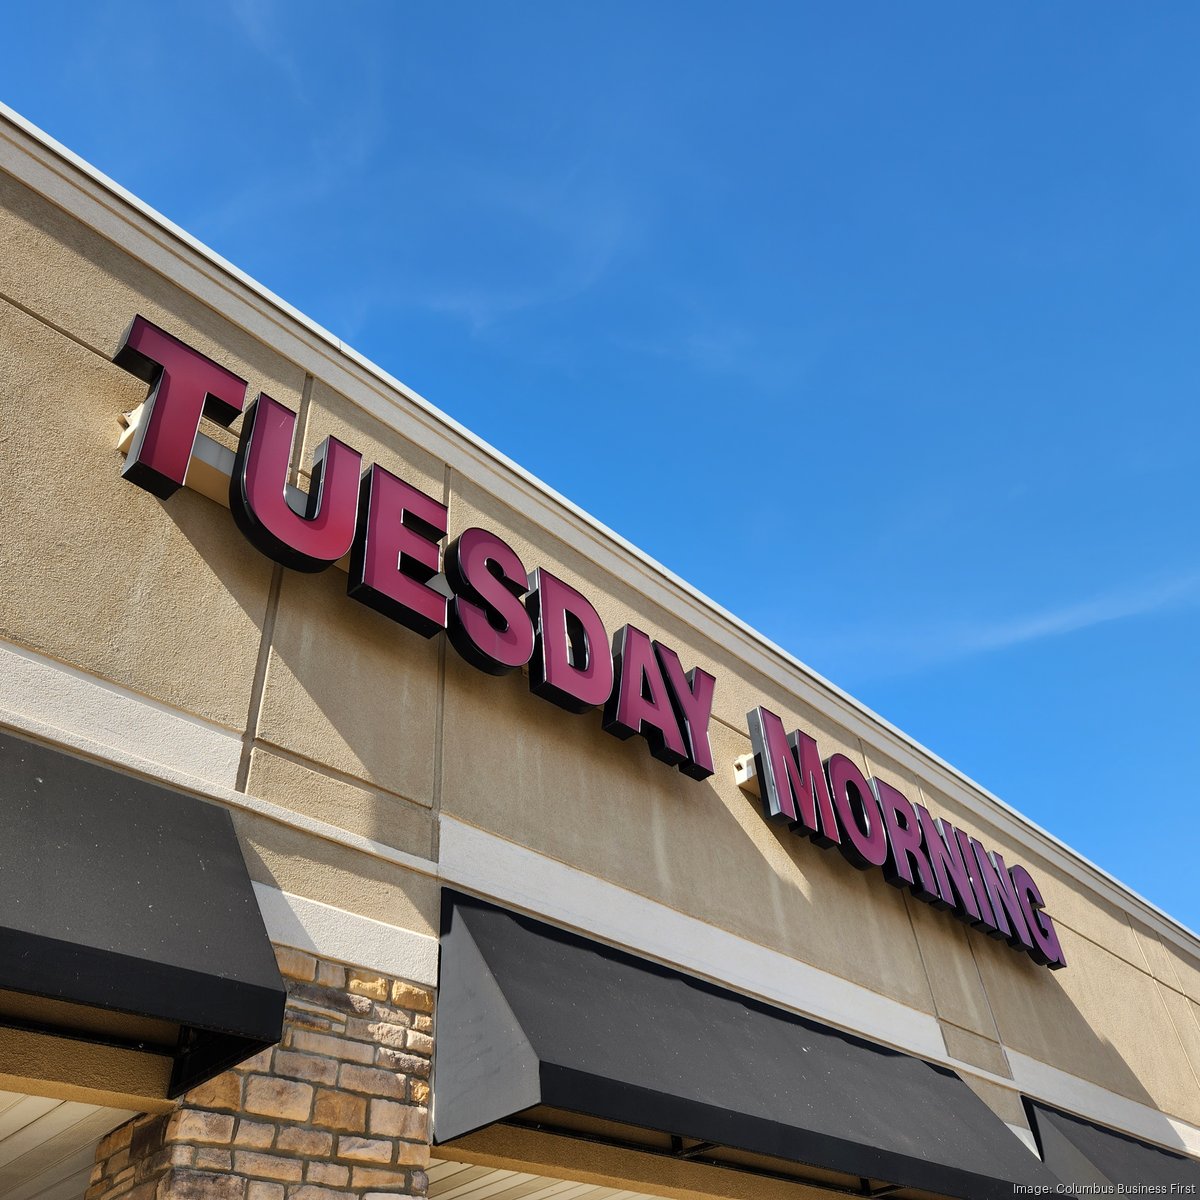 What Tuesday Morning stores are closing in Tampa Bay?